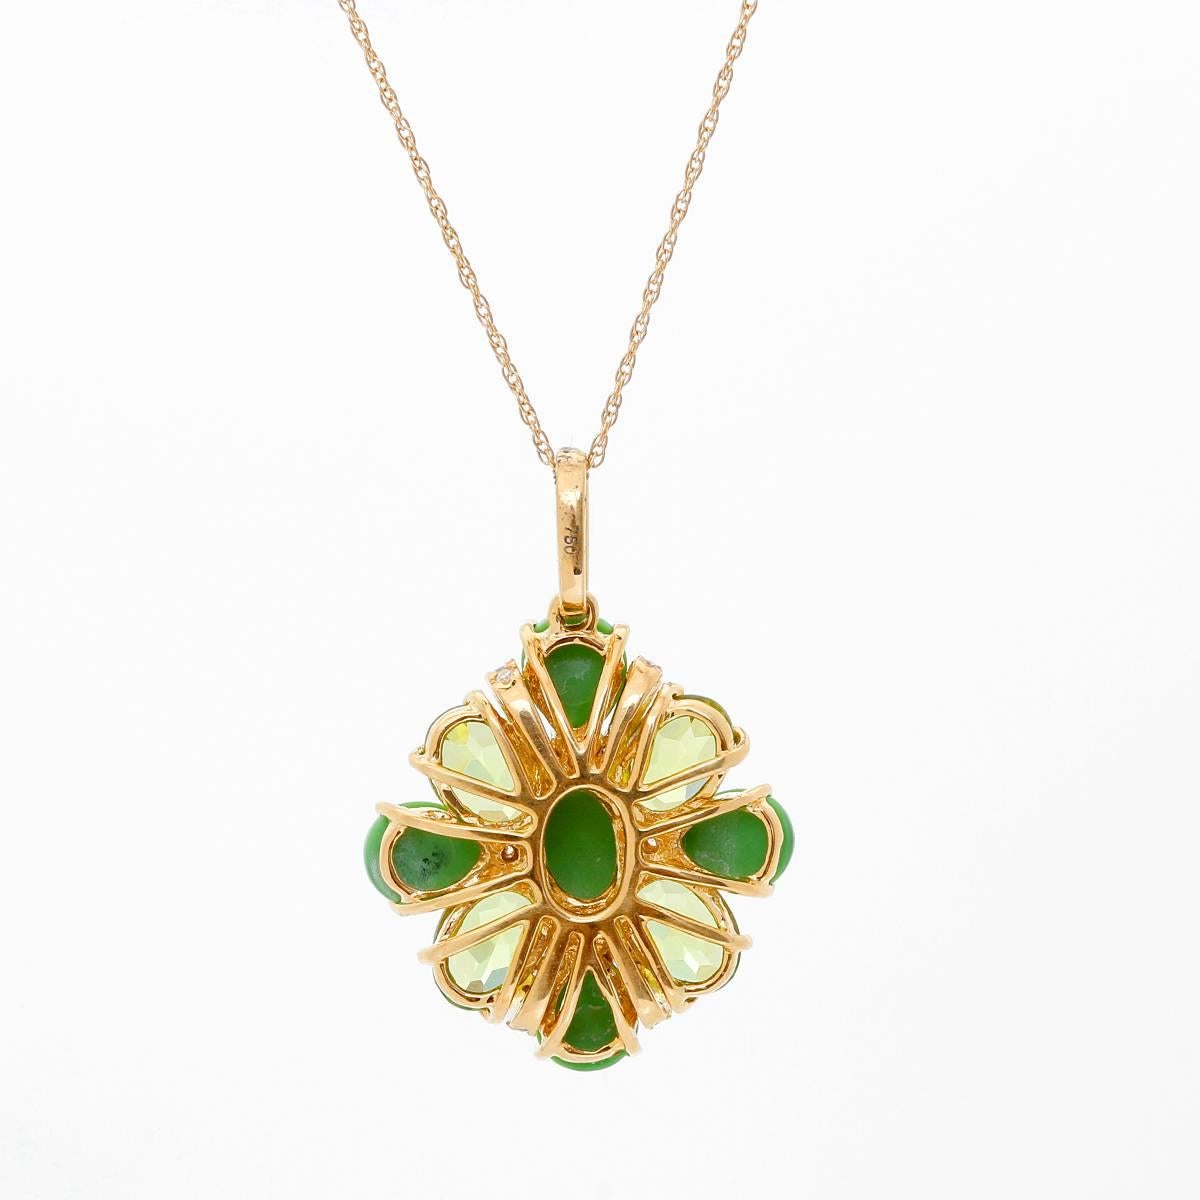 Peridot, Green Turquoise and Diamond Necklace - . Cabochon Green Turquoise and oval Peridots in a floral pattern. Rows of diamonds set in yellow gold around the green stones. 3.34 cts of Peridot. 1 ct of Cabochon Green Turquoise. .22 cts of diamond.